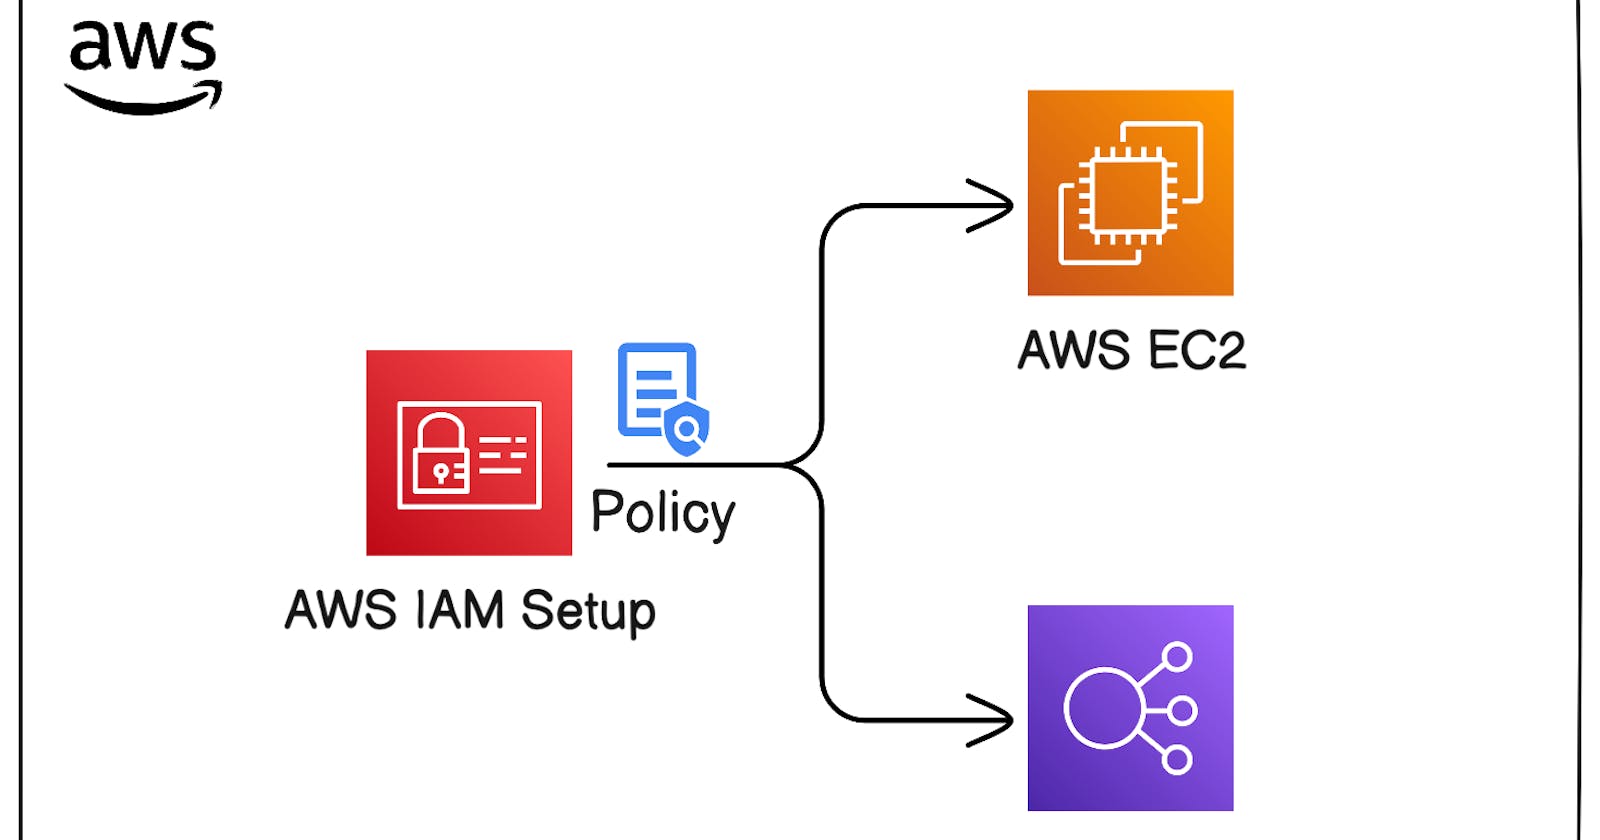 Learn AWS IAM in Under 5 Minutes with This Hands-On Lab